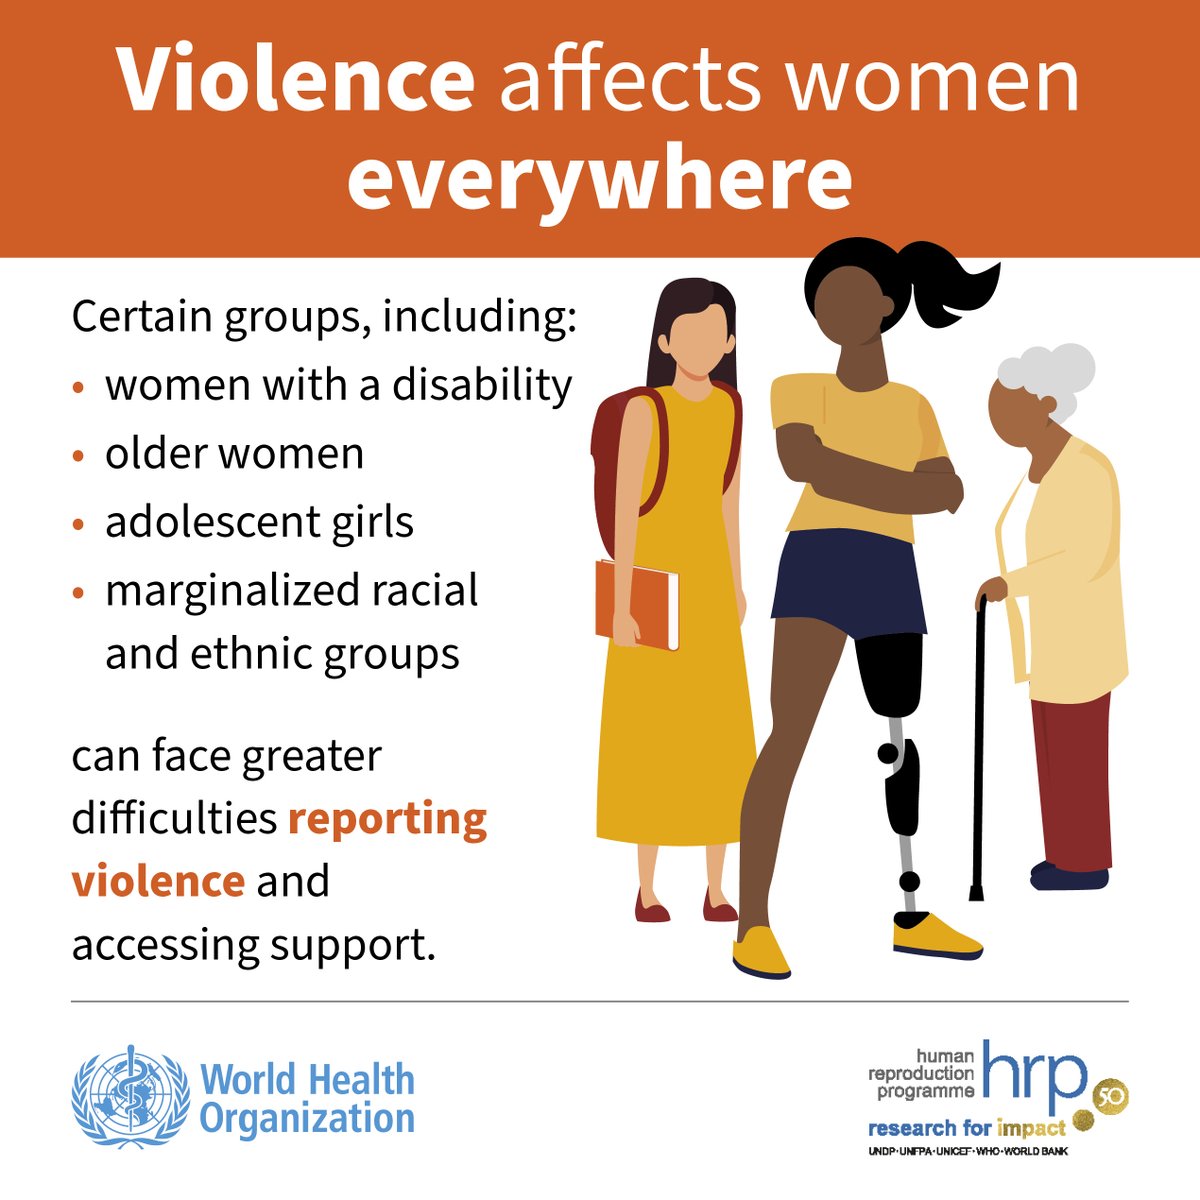 How are women with #disabilities overlooked in #VAW research? Challenges include too-narrow inclusion criteria, not disaggregating data, and focusing too much on households. @LynnSardinha explains more in a new brief: bit.ly/3IWypf3